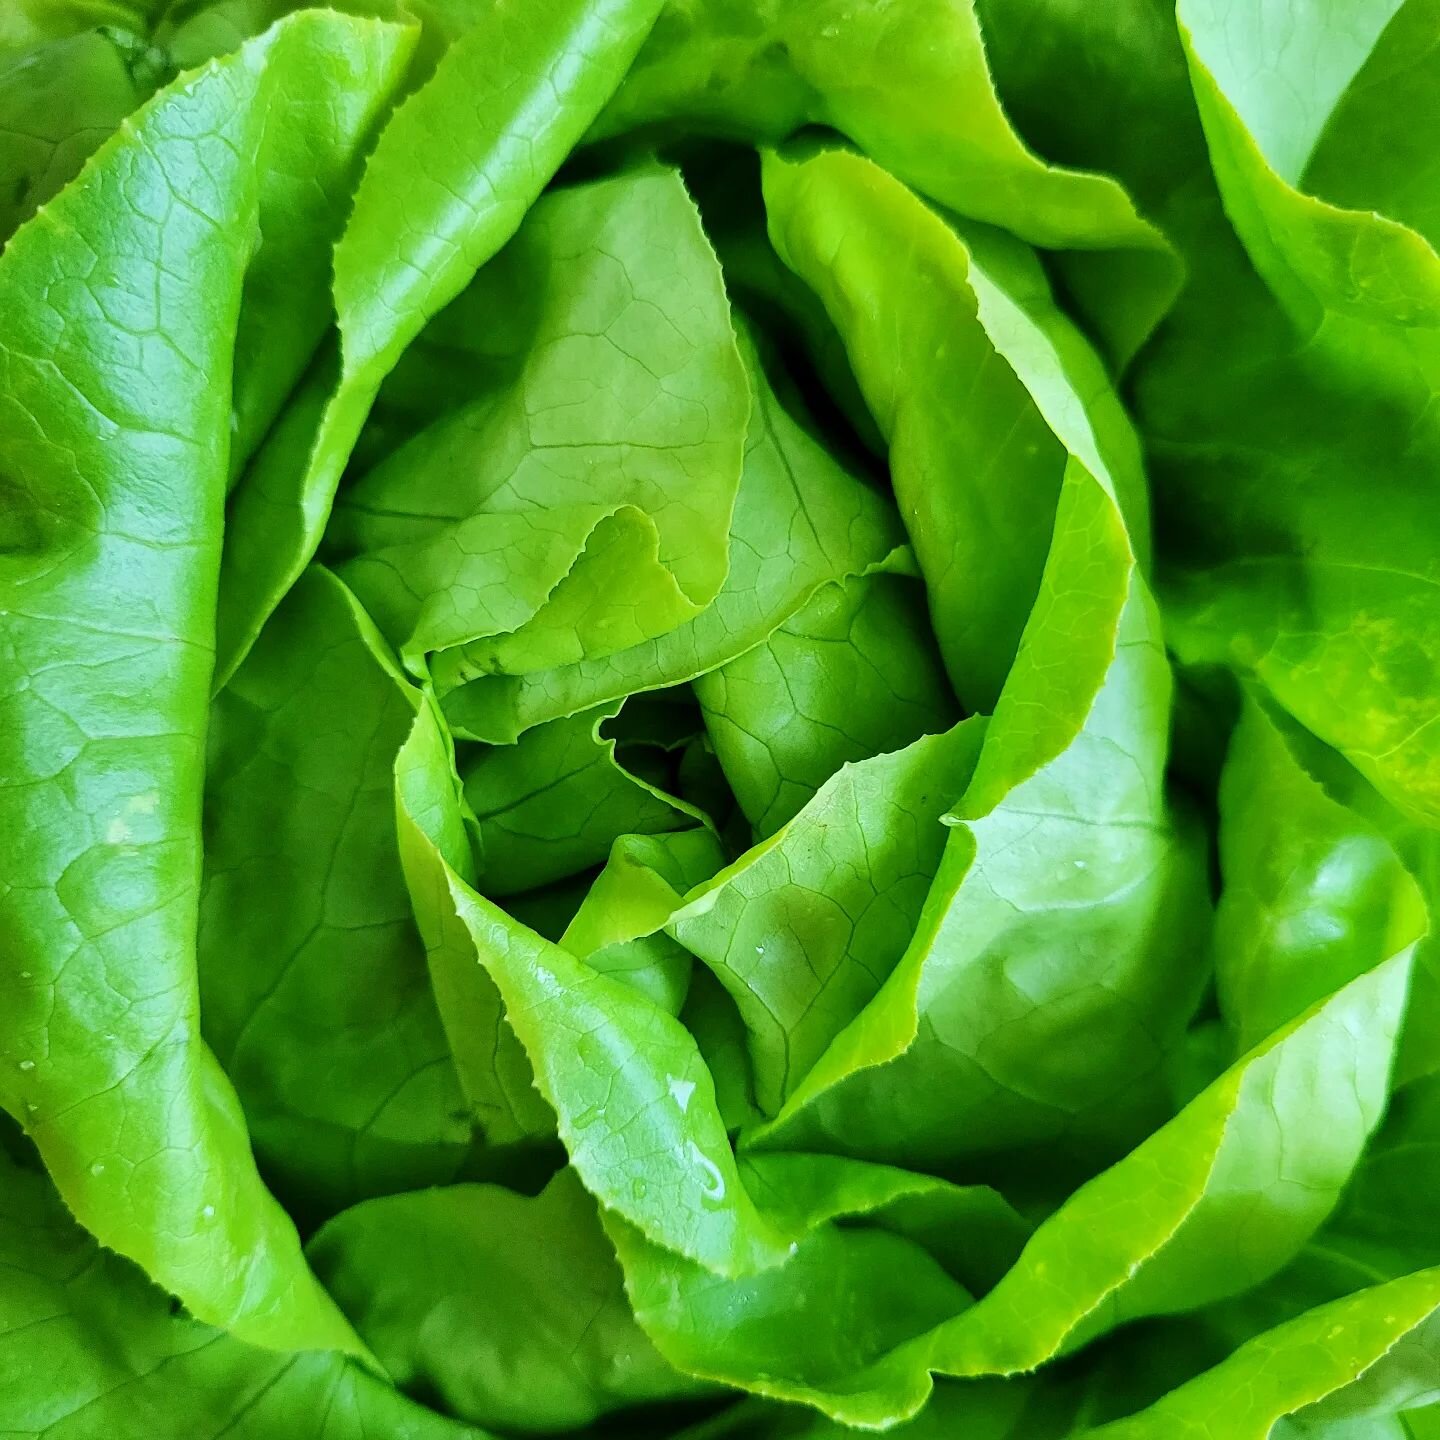 A bit of hope for parents of sensory-sensitive eaters: after 34 years I am now a person who eats salad.

The keys were fresh local greens (nothing slimy or overly bitter, generally spinach and romaine, thanks @franklincountyfarmersmarket), no more th